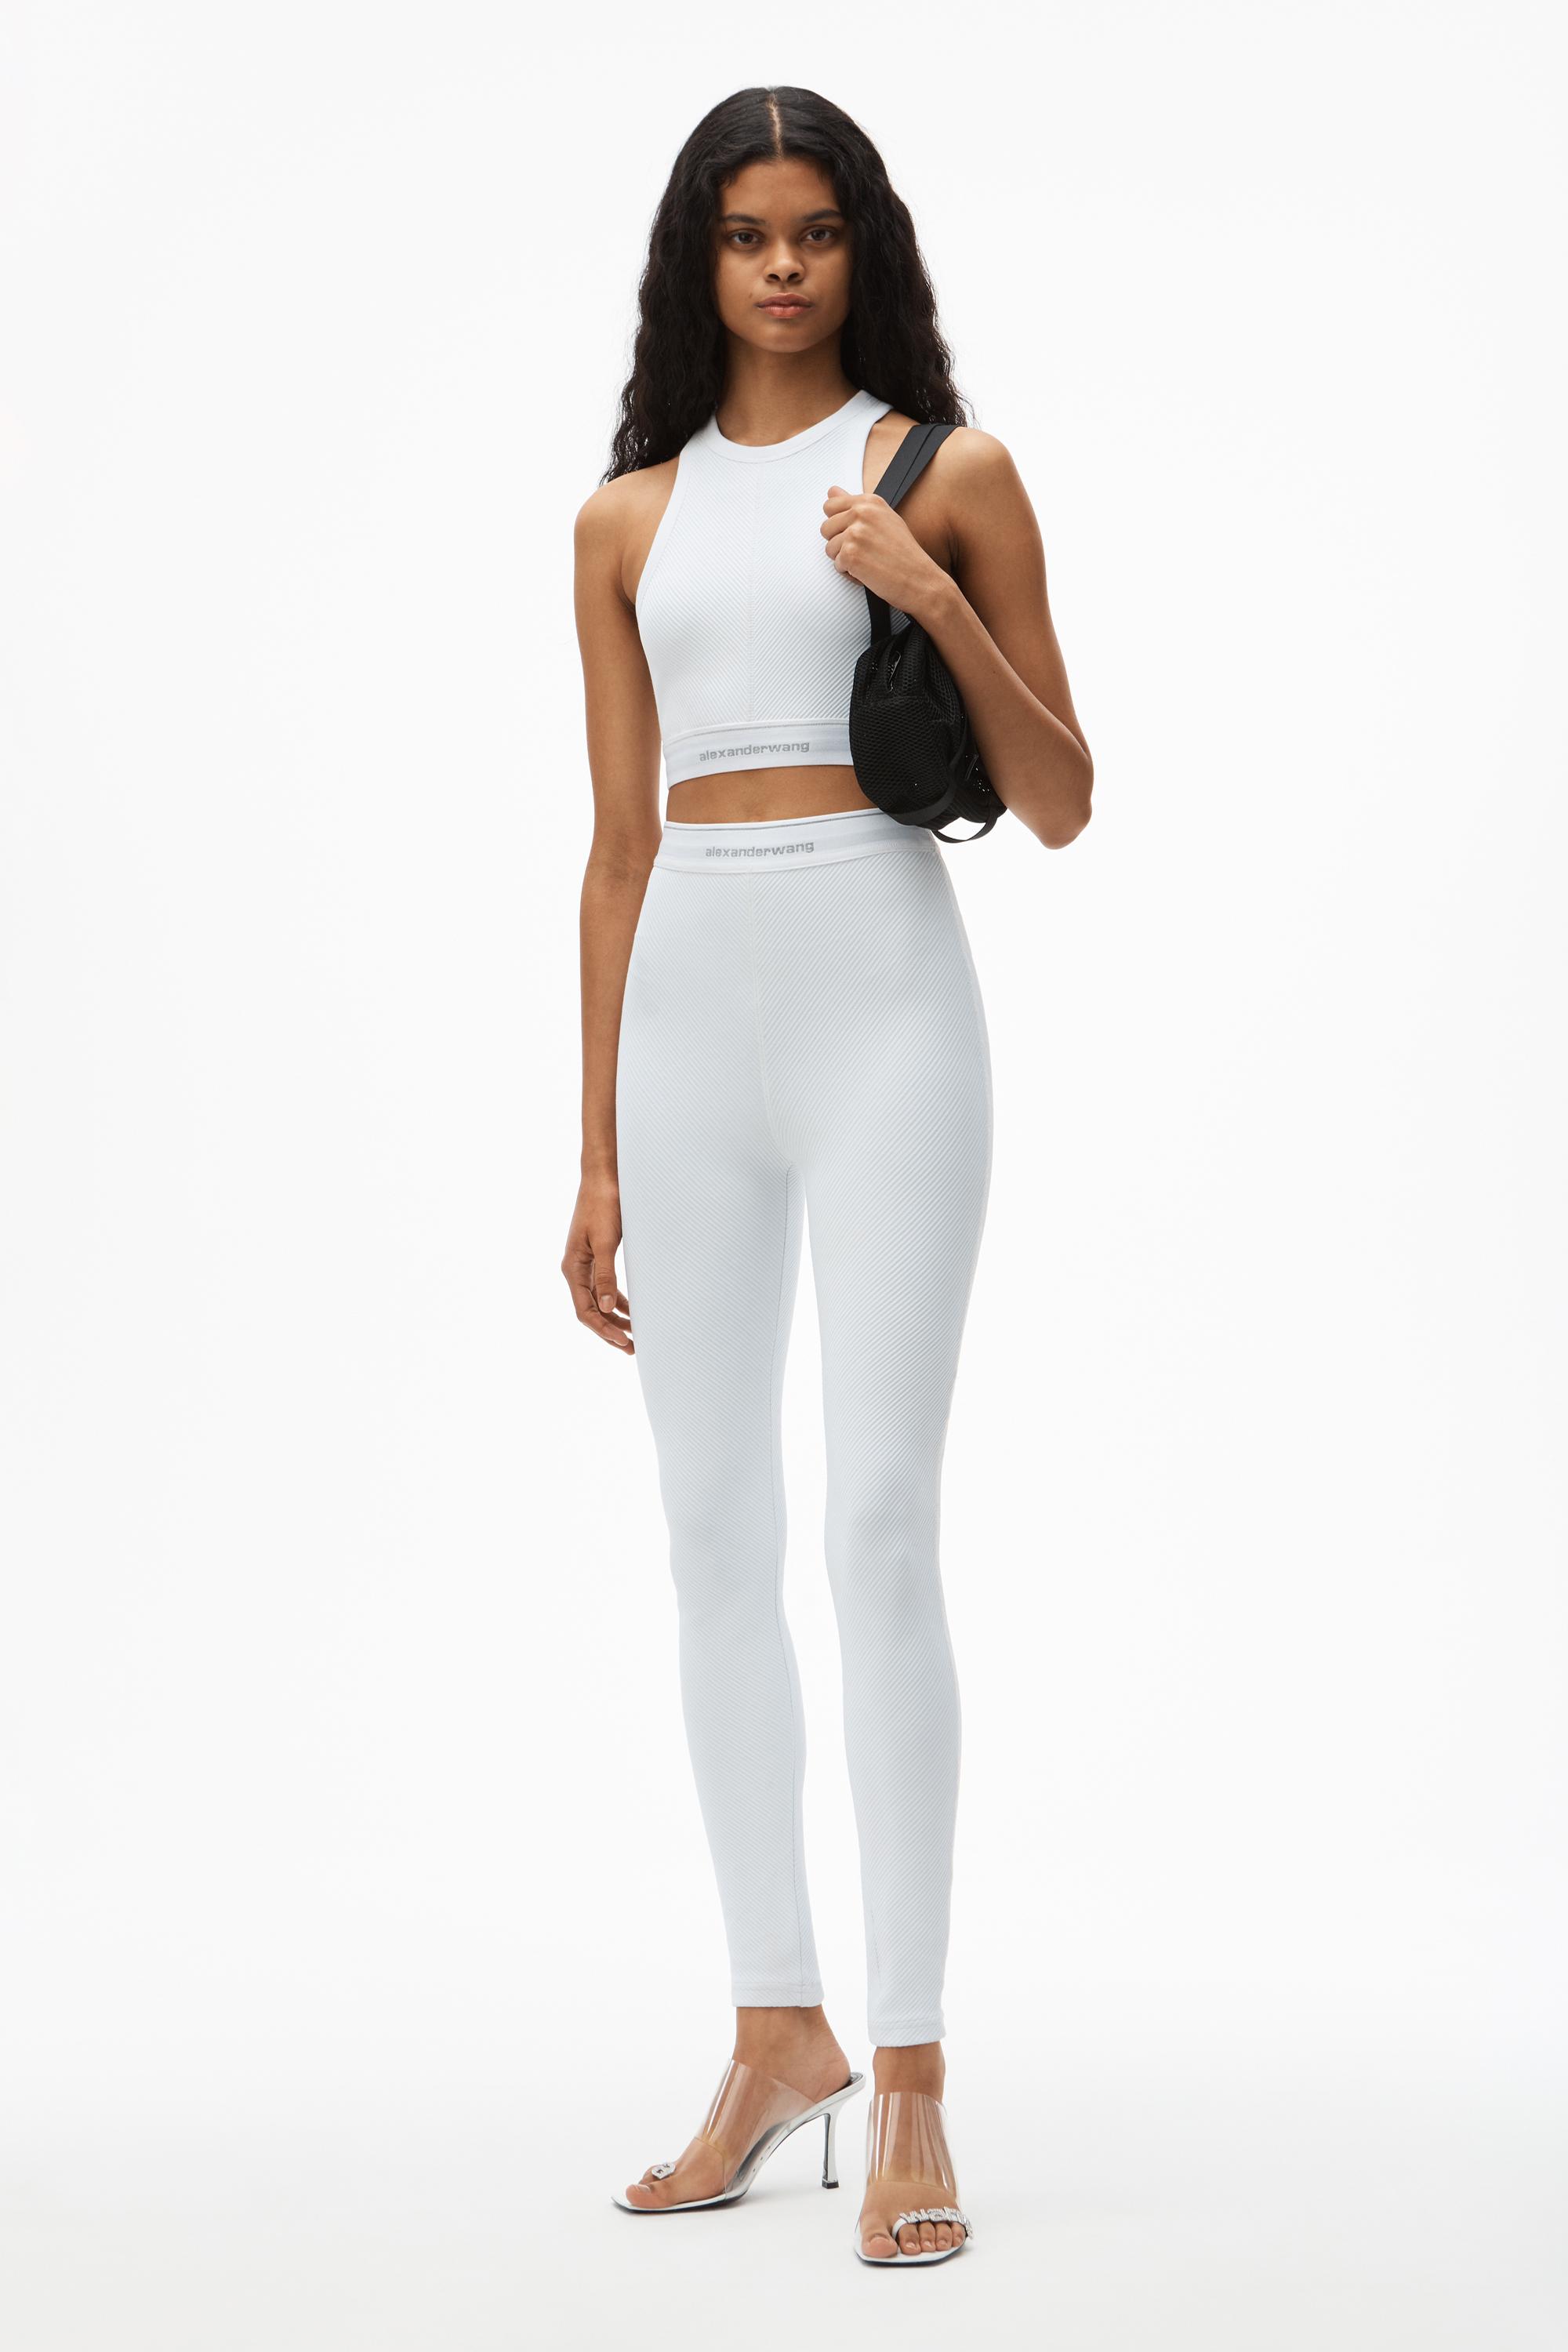 Alexander Wang Reflective Logo LEGGING In Stretch Knit in White | Lyst